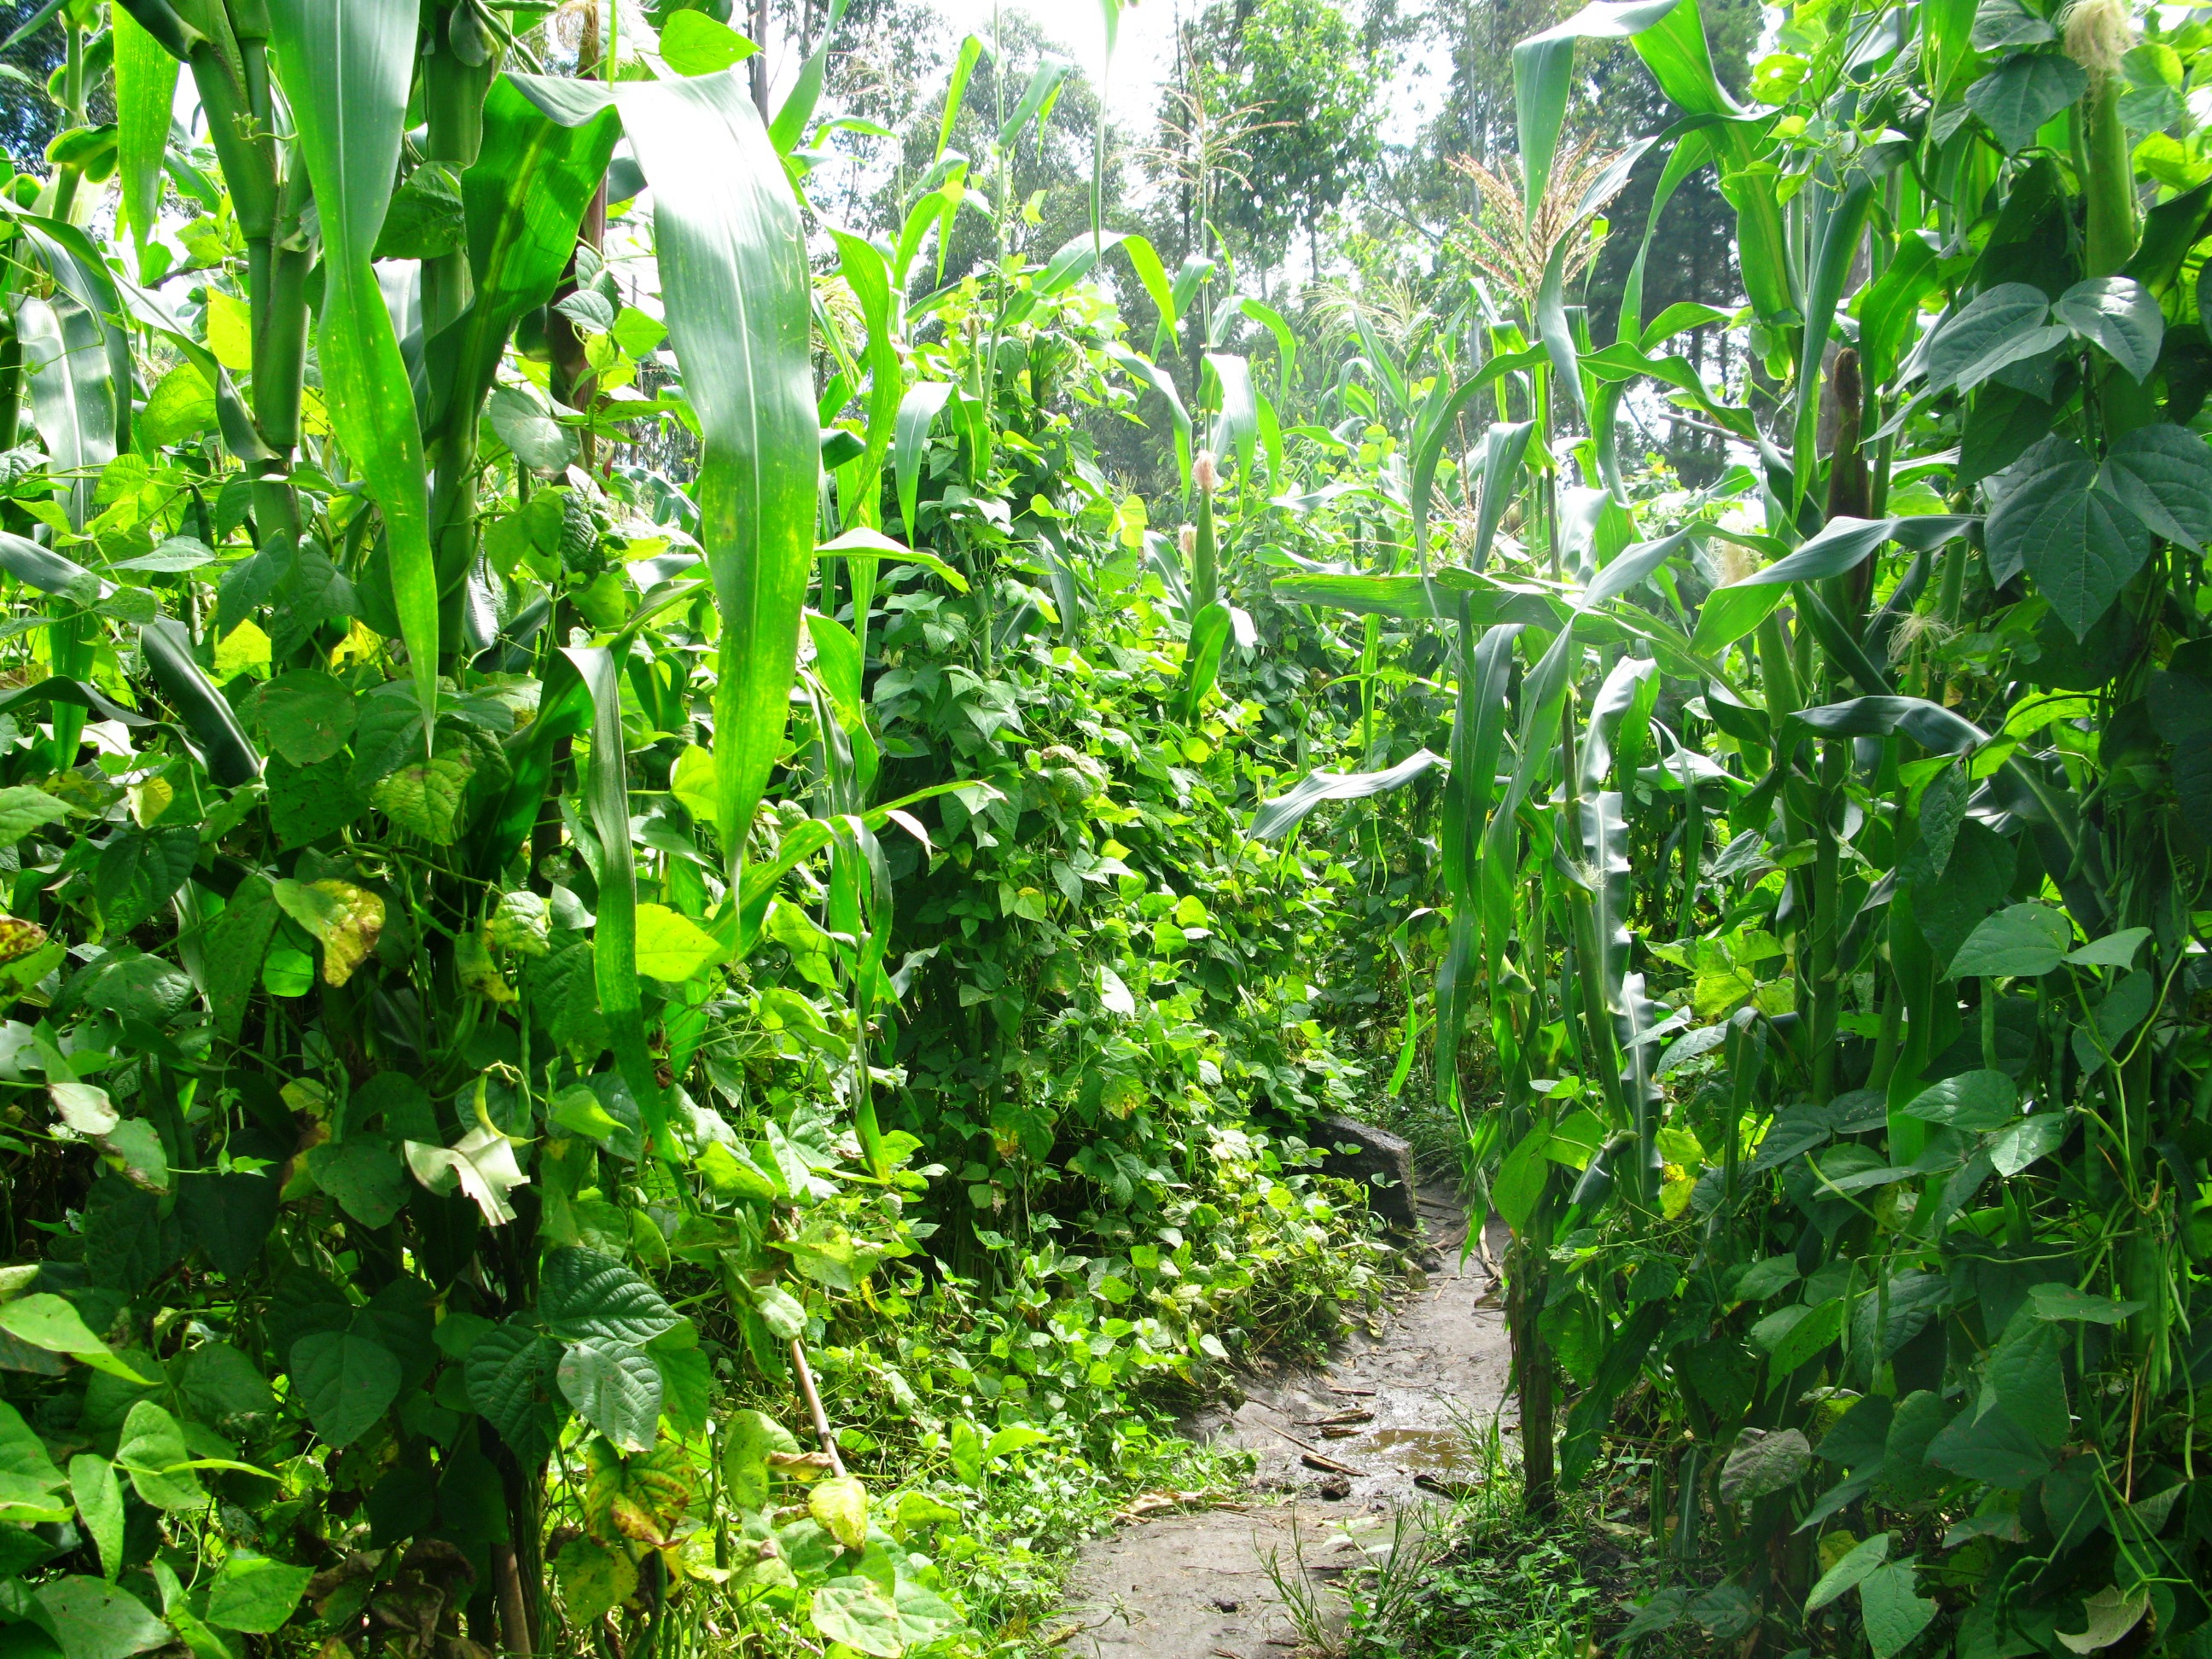 Tall corn plants with large, linear leaves. Vines of beans with smaller, wider leaves climb up the corn.